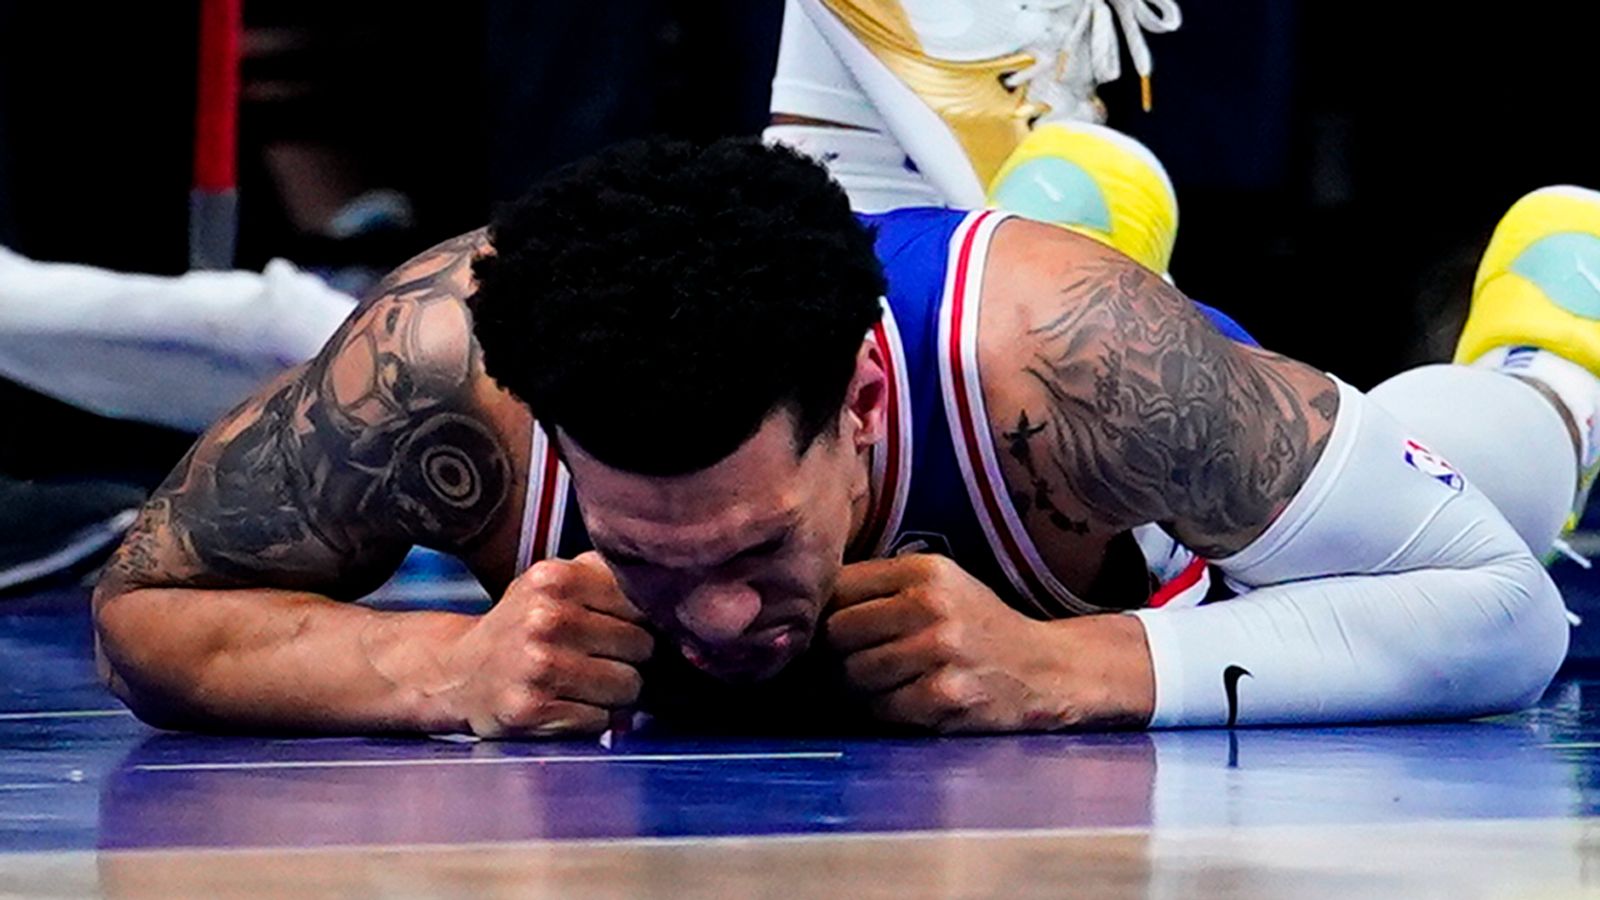 Danny Green diagnosed with torn ACL after Philadelphia 76ers guard